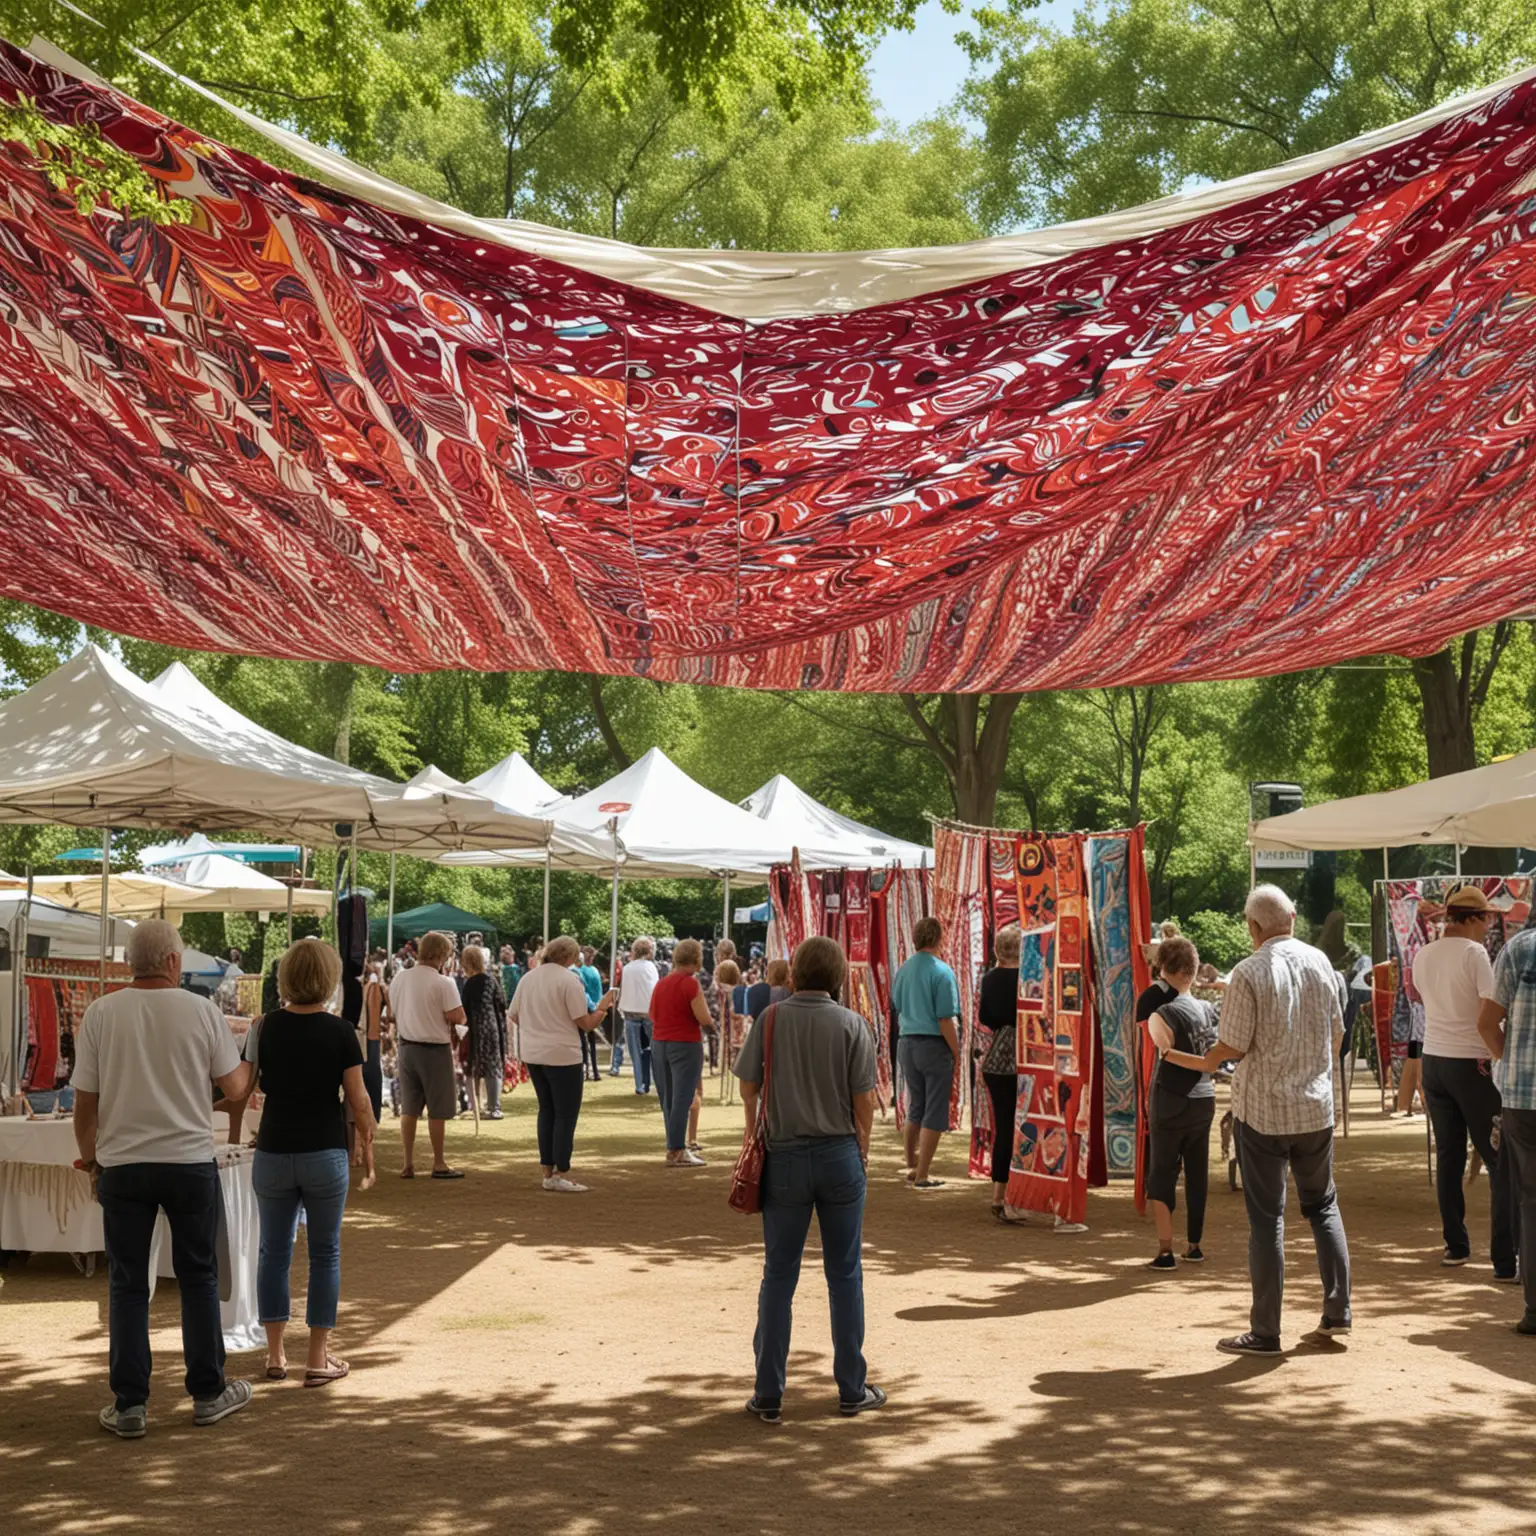 Art Enthusiasts Delight in Textile Exhibition at Local Park Fair